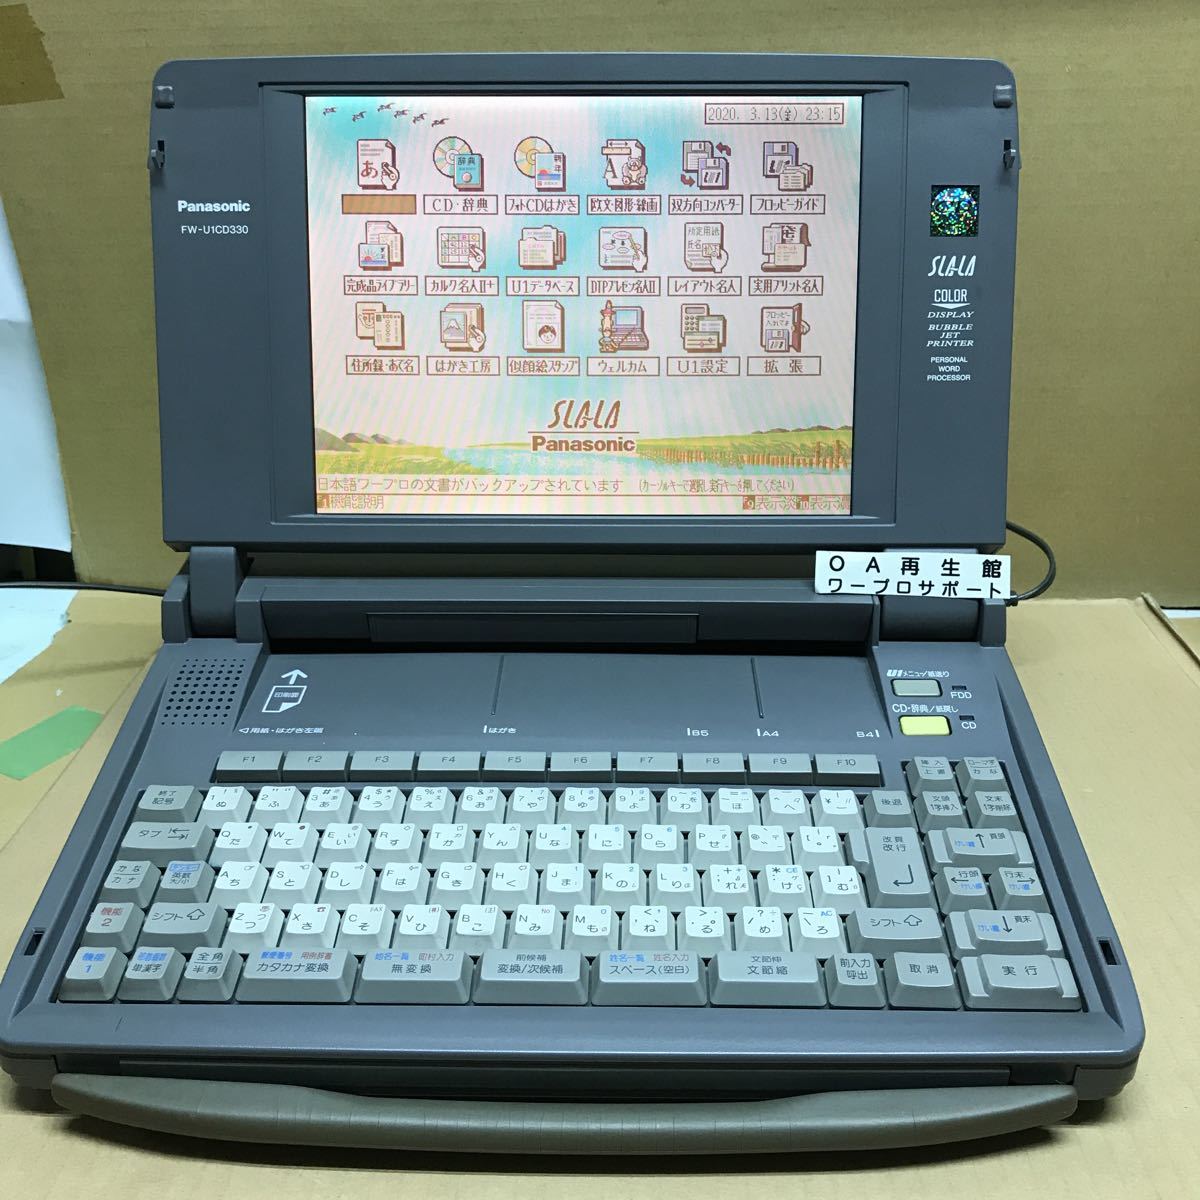  Panasonic word-processor FW-U1CD330 service being completed 3 months guarantee equipped 